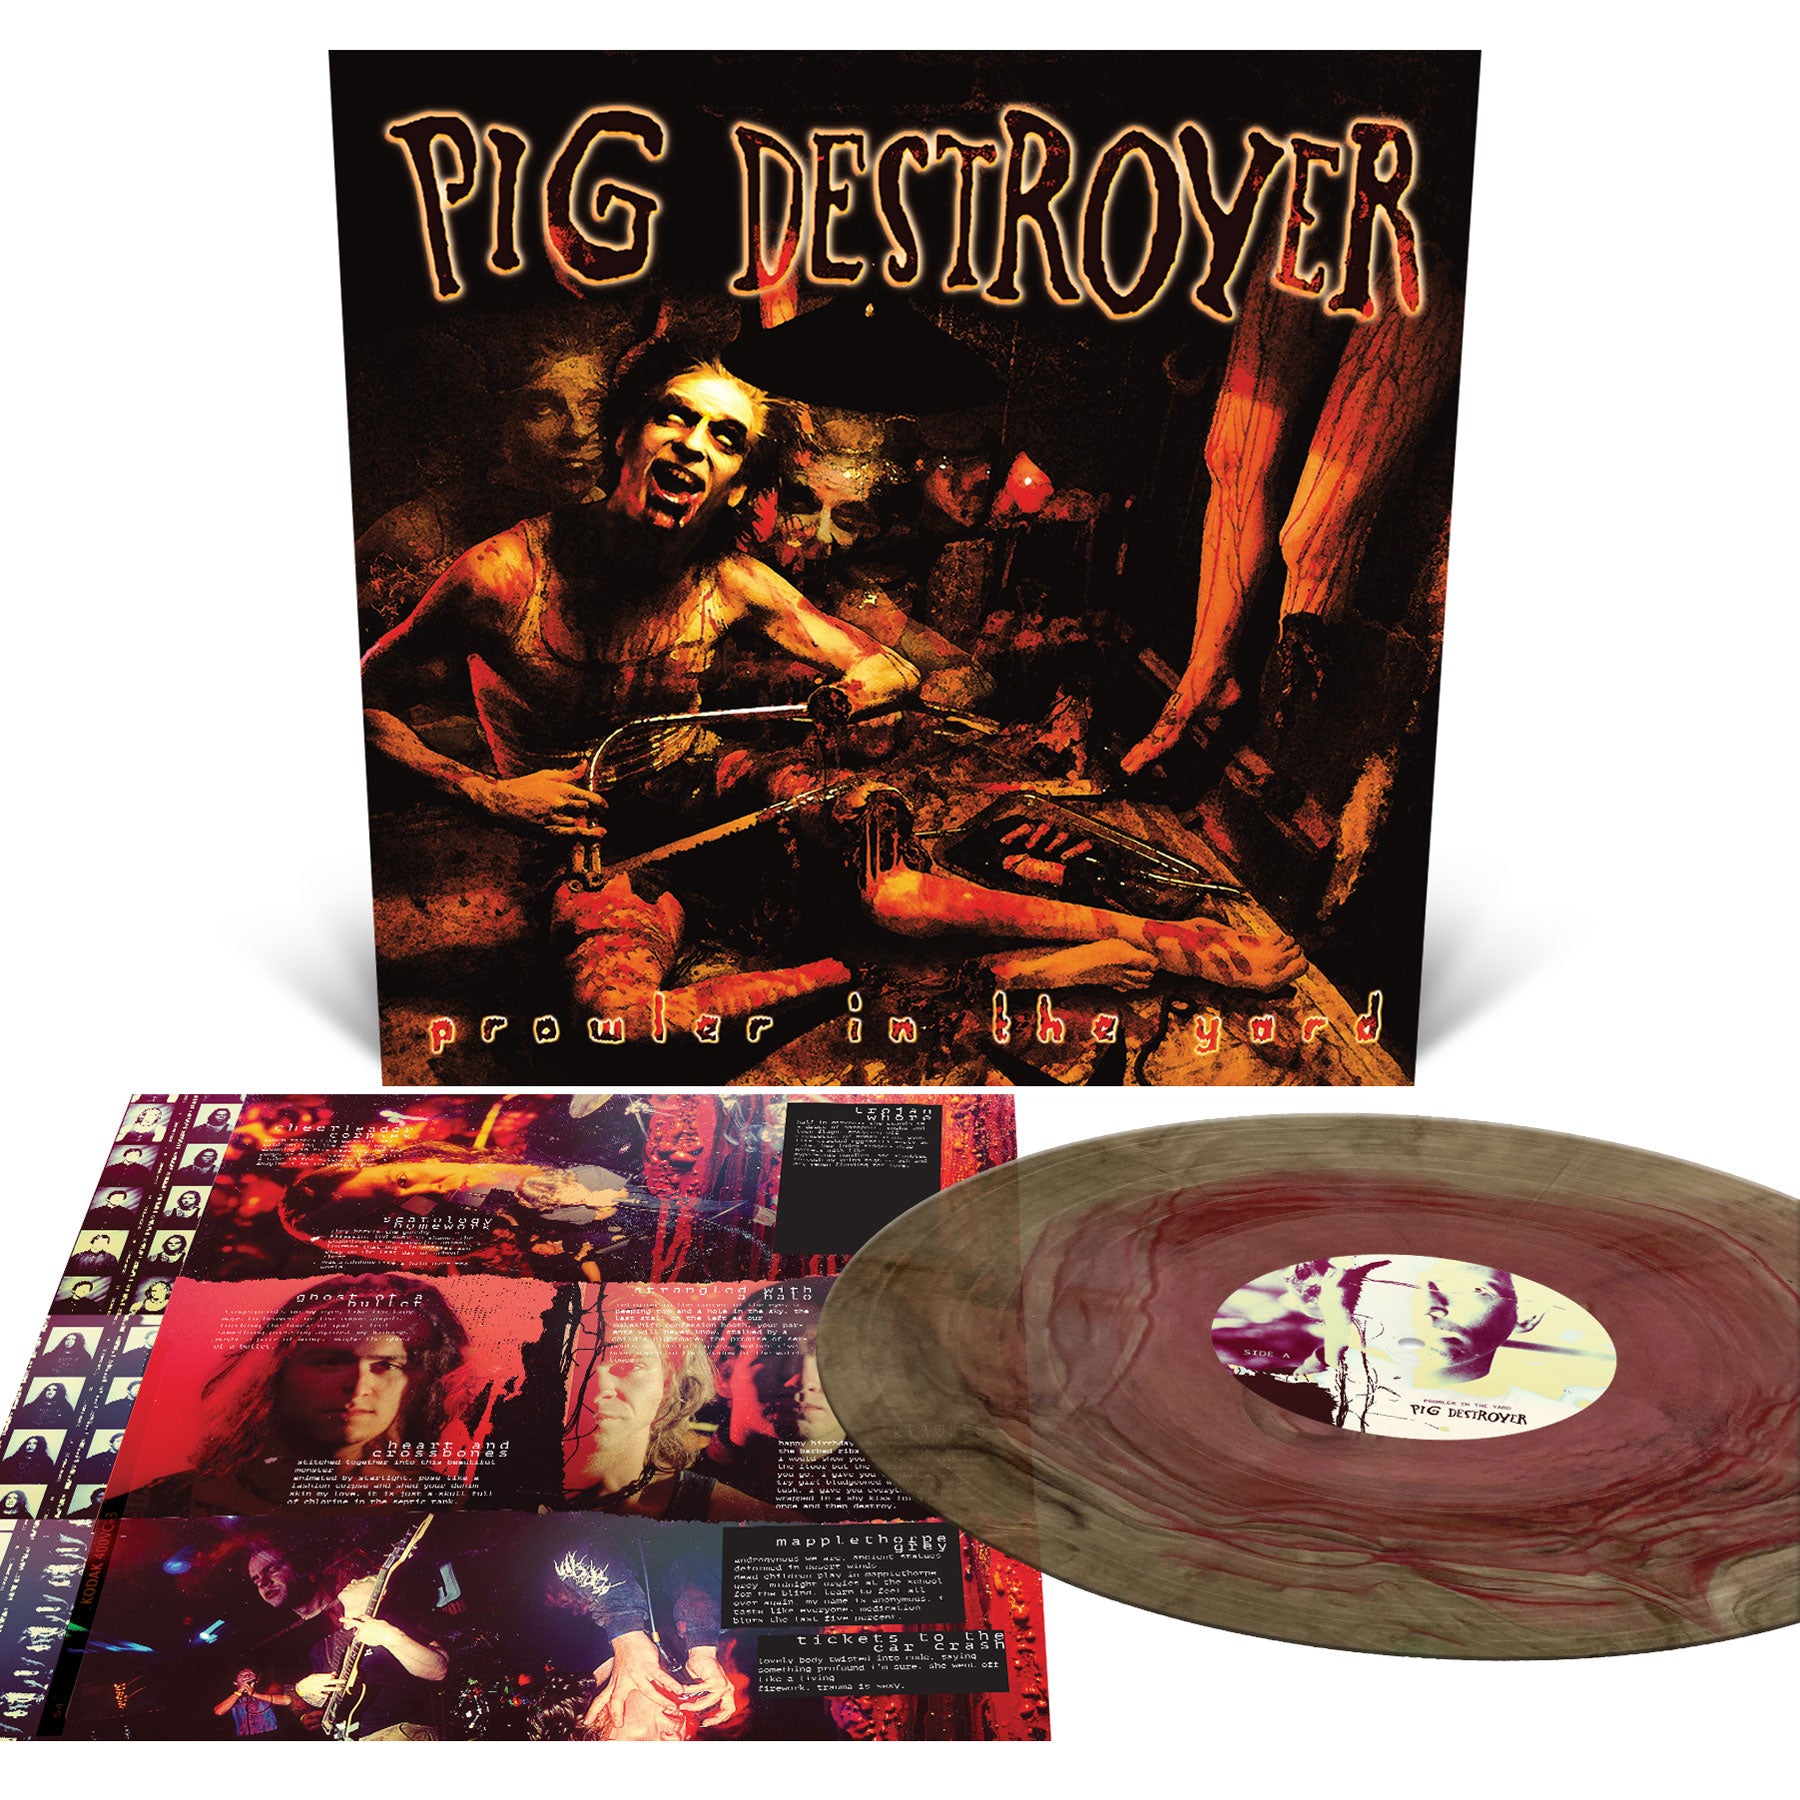 Pig Destroyer "Prowler In The Yard (Reissue)" 12"